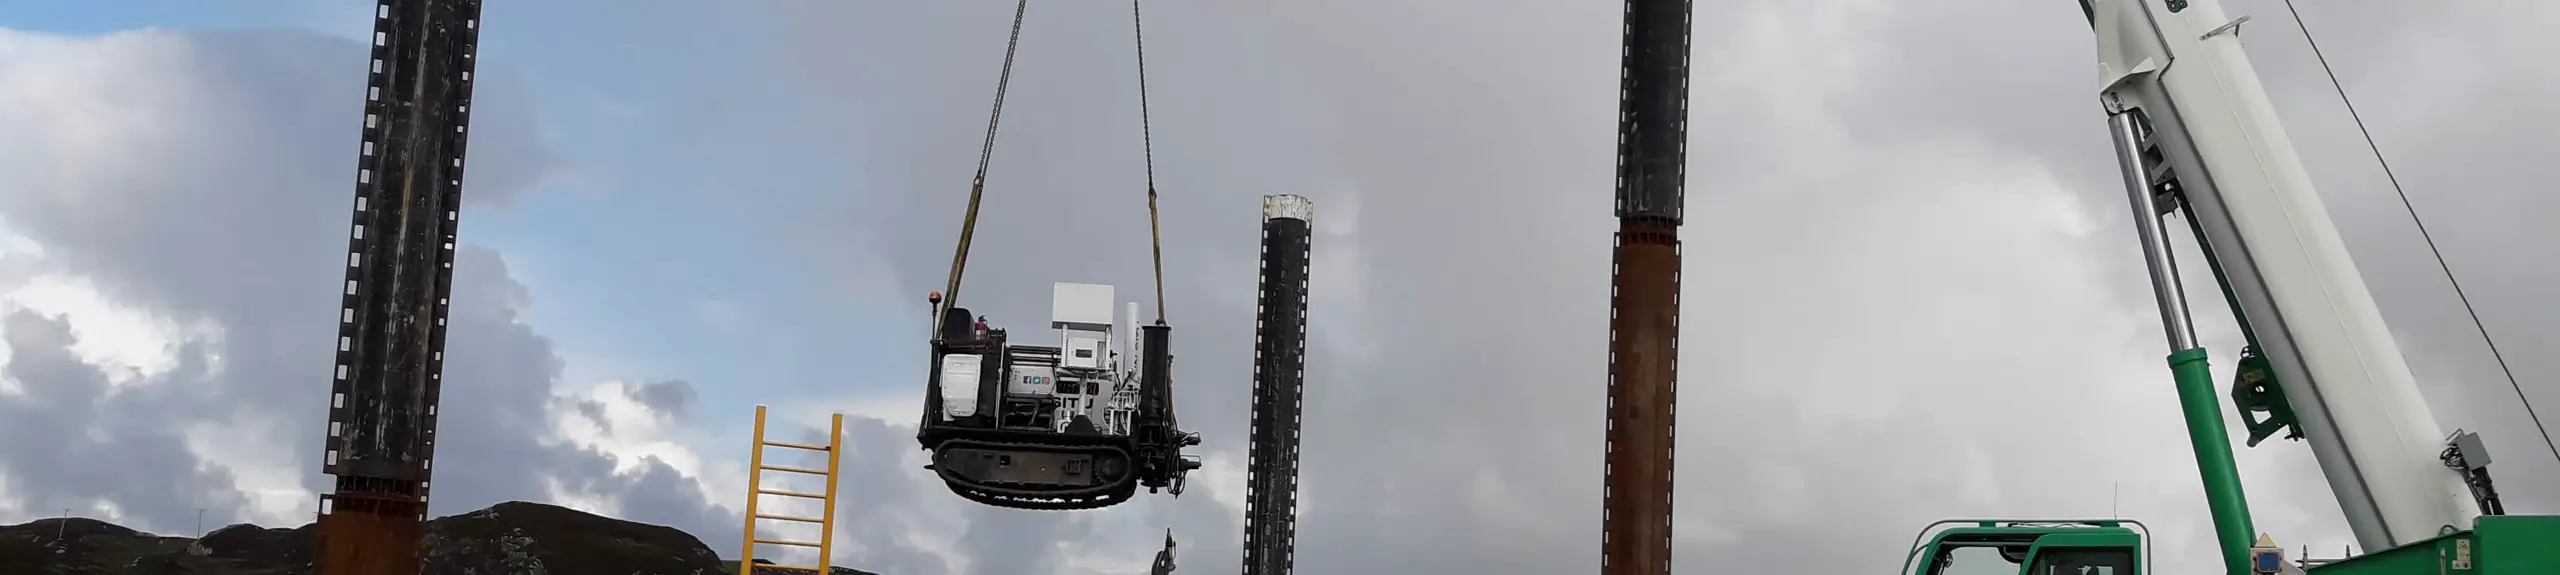 CPT rig craned onto position